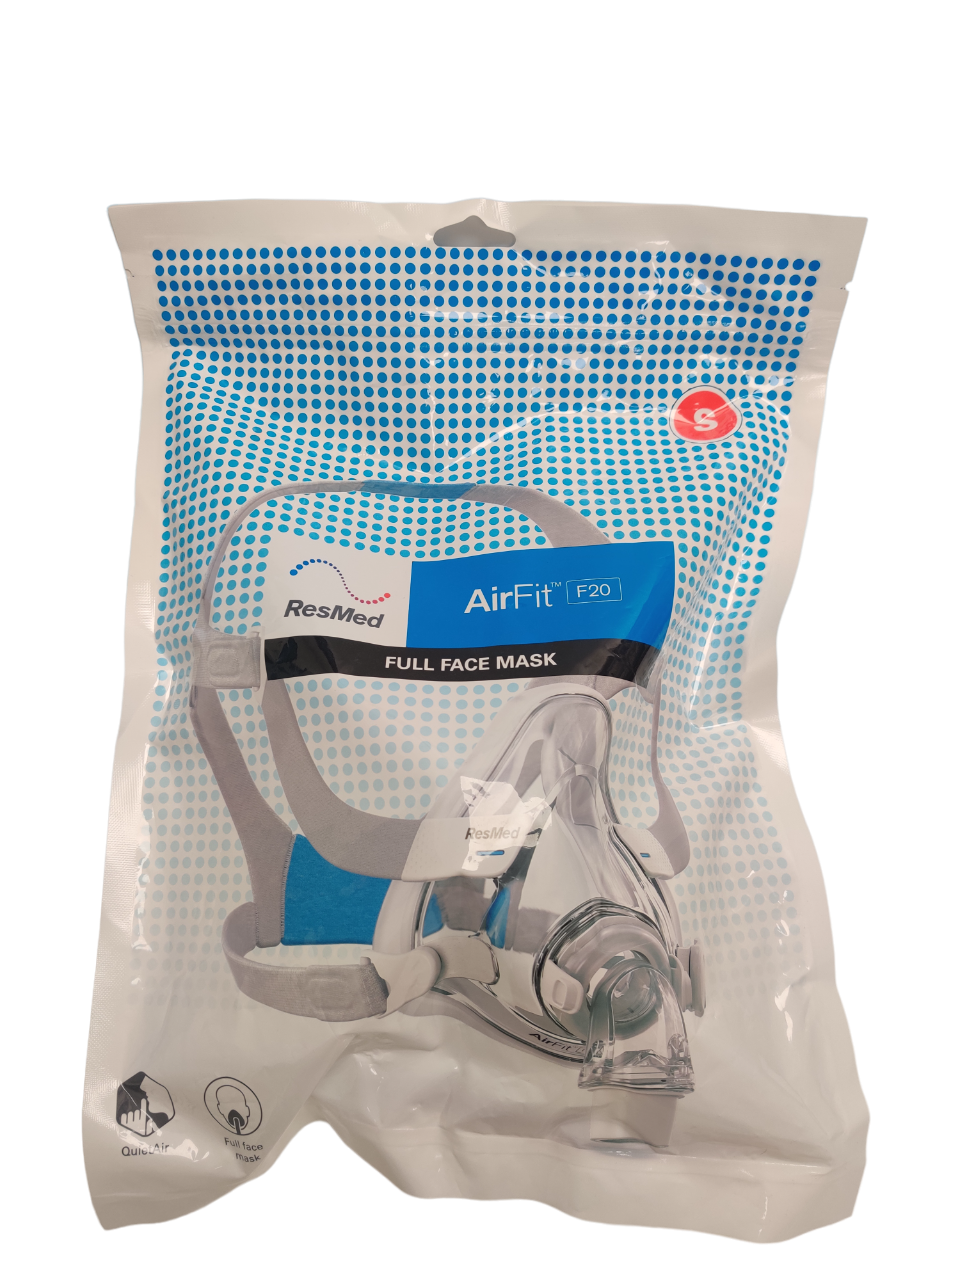 ResMed AirFit F20 Full Face CPAP Mask Assembly Kit